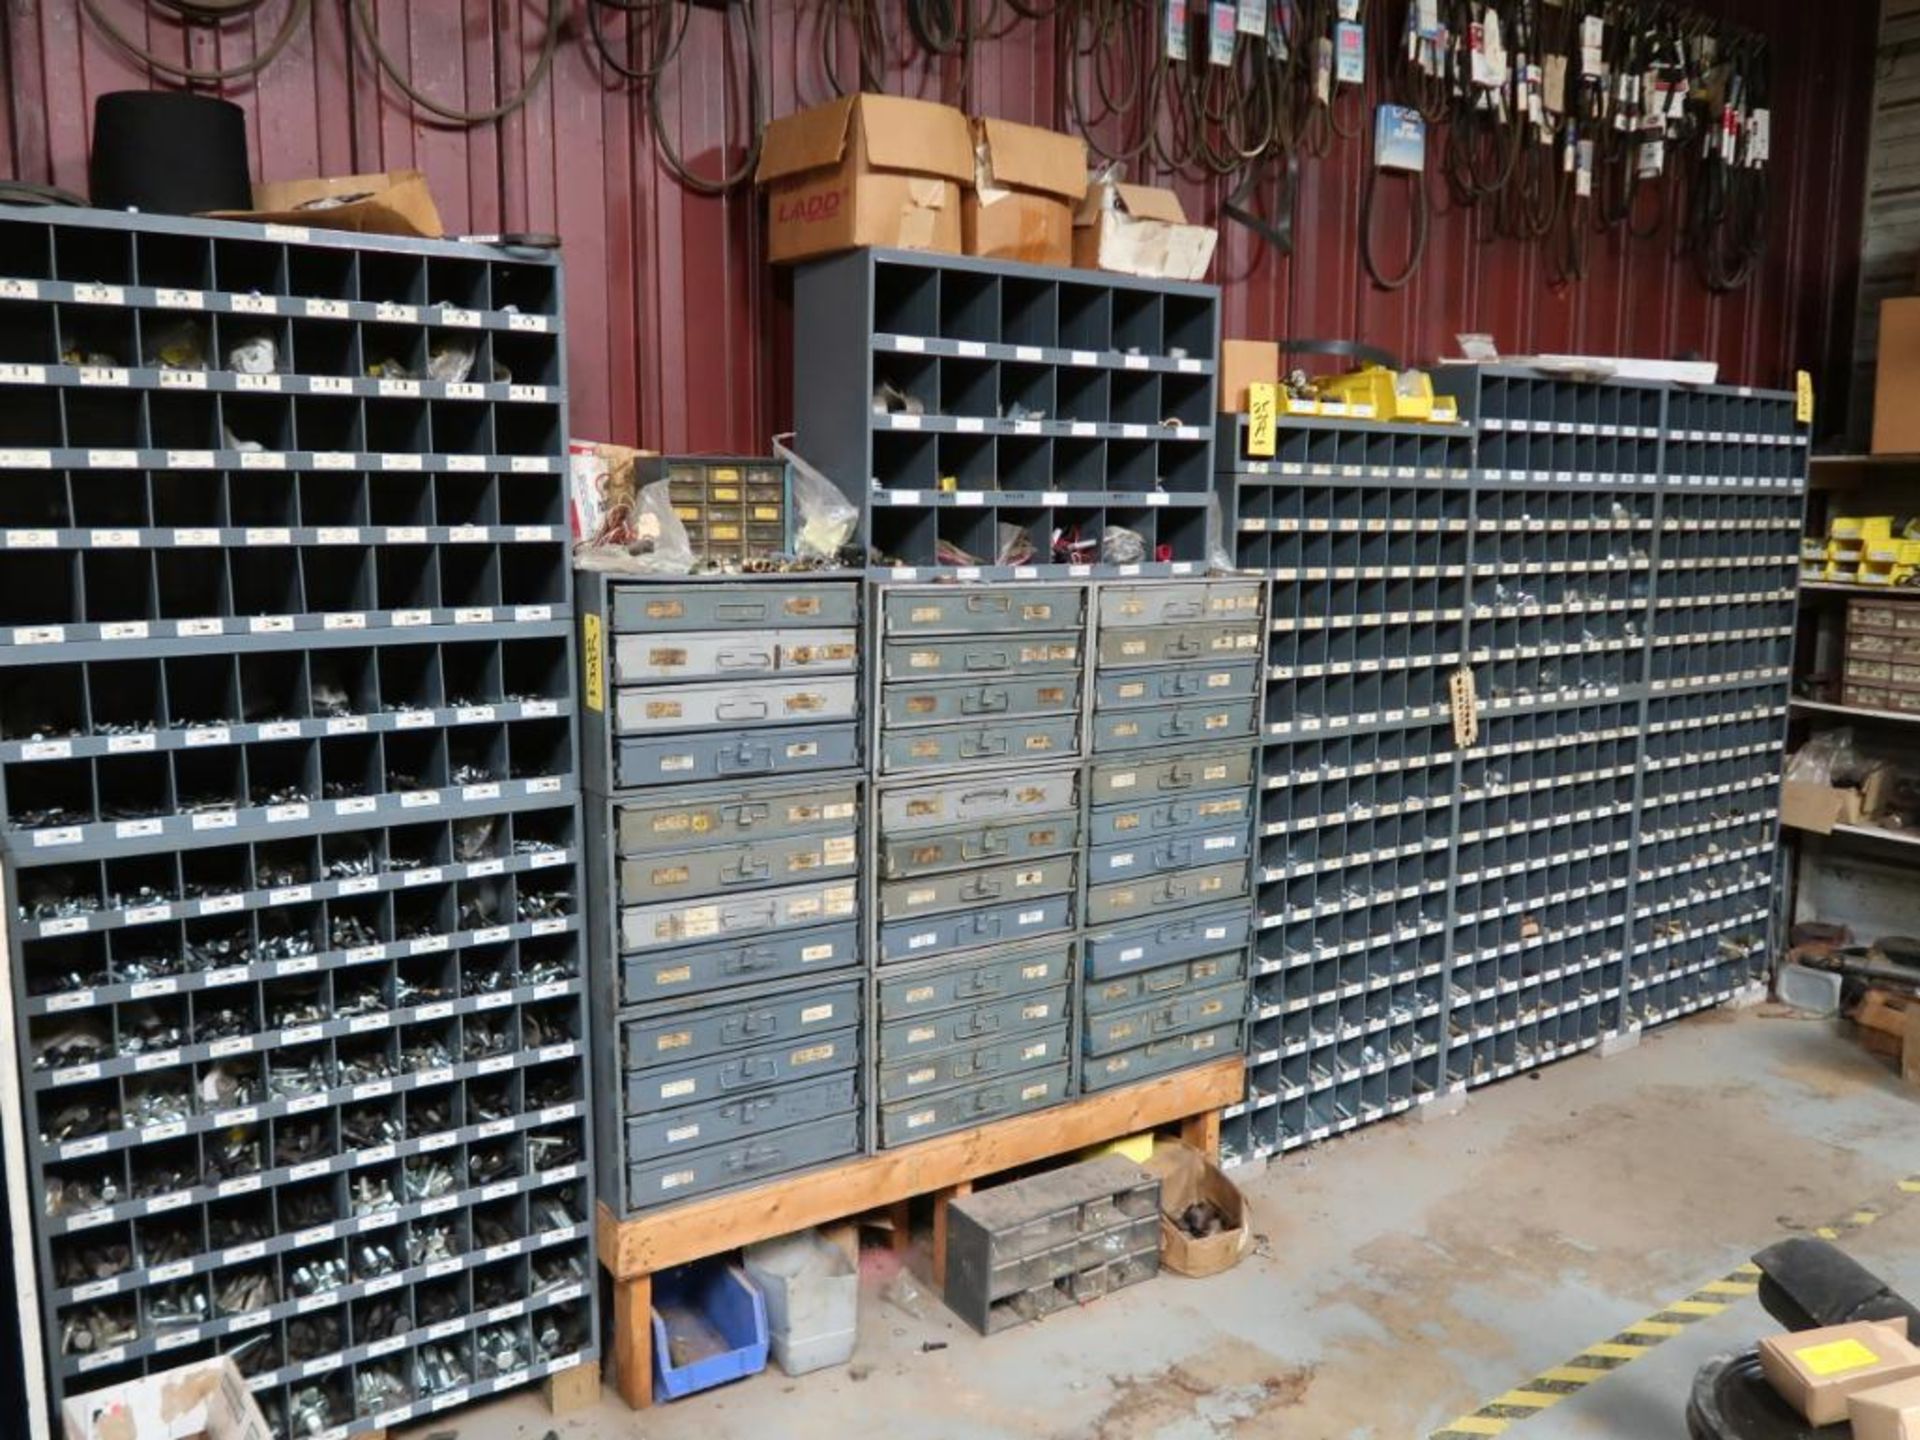 LOT: Large Quantity of Fasteners with Cubby Hole Shelving & Drawers